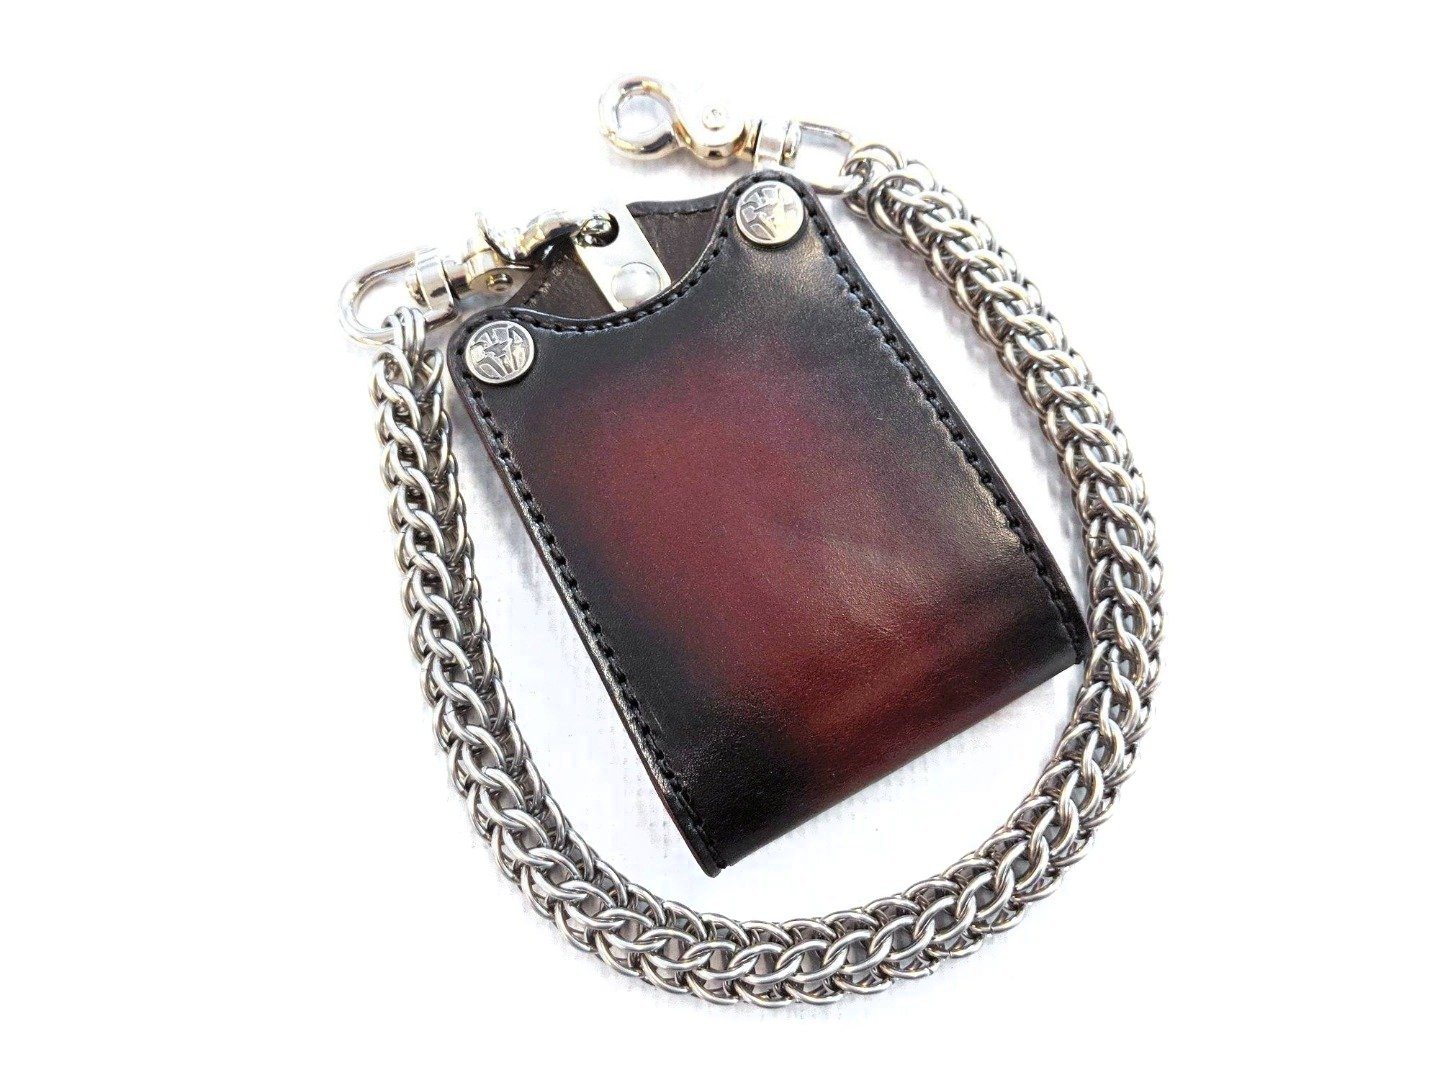 Leather Chain Wallet 